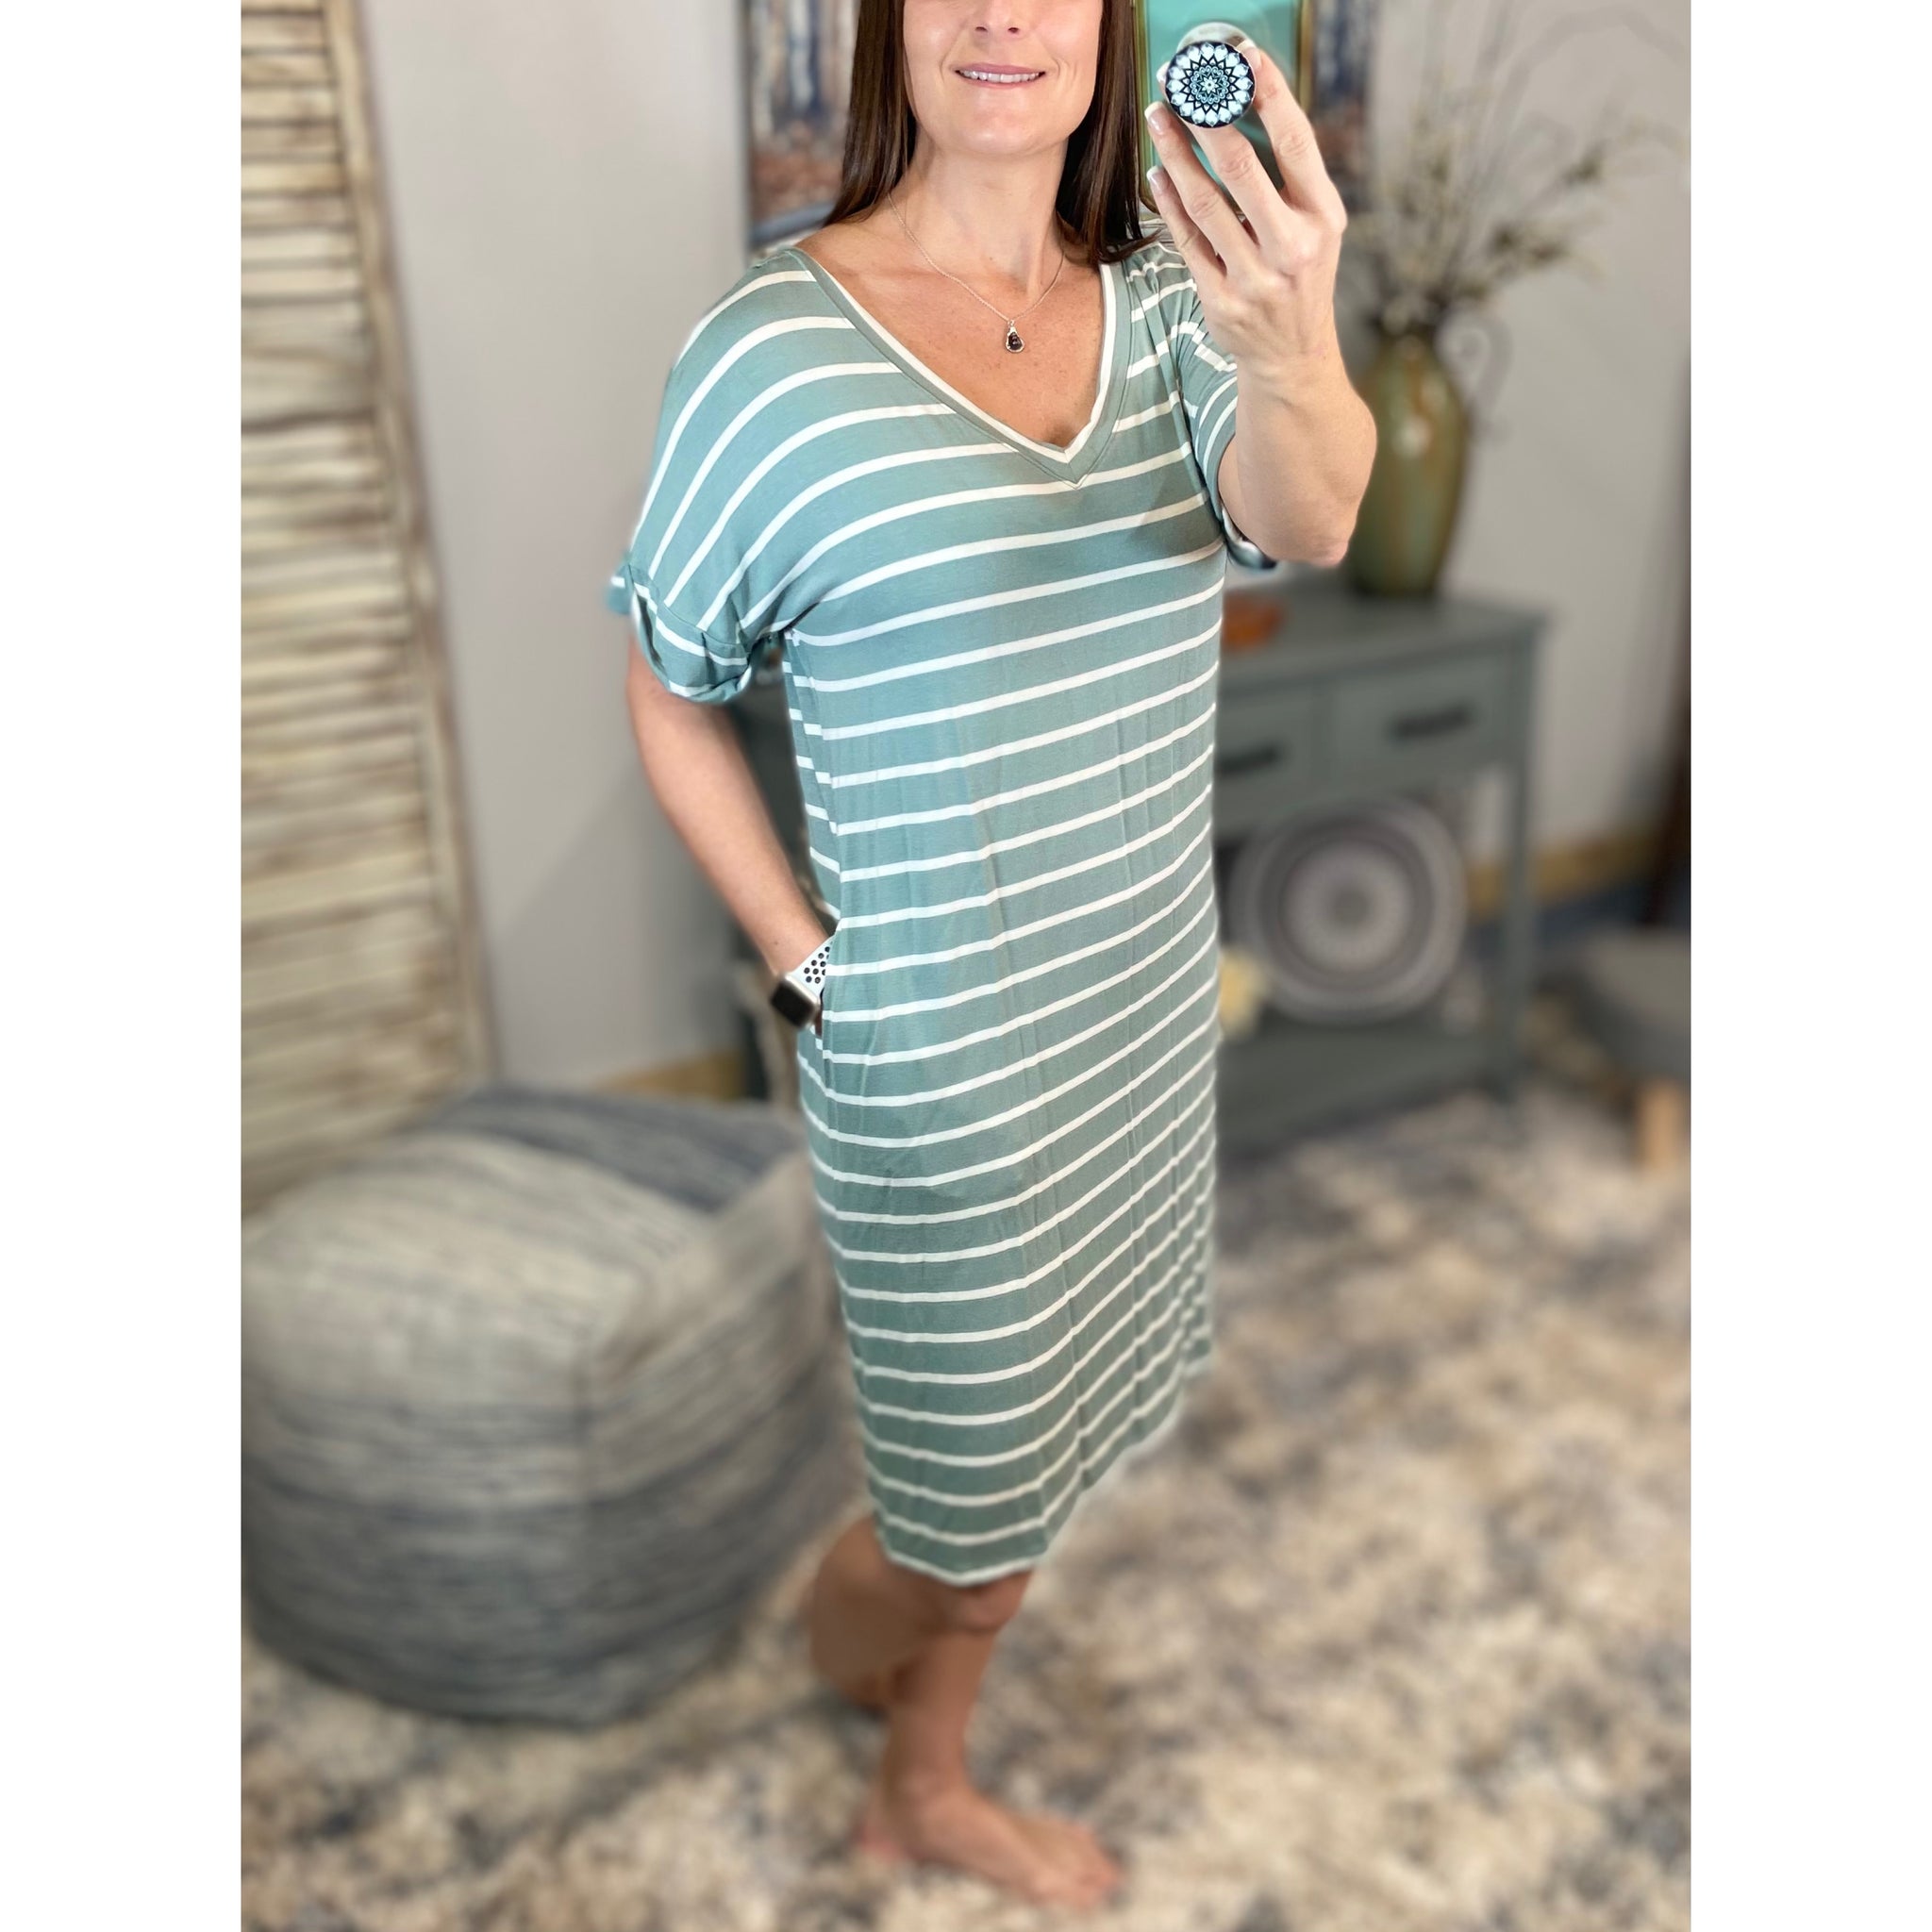 "Think Out The Box" Boxy V-Neck Striped Rolled Cuff Sleeve Pocket Summer Tee Shirt Dress Sage Green S/M/L